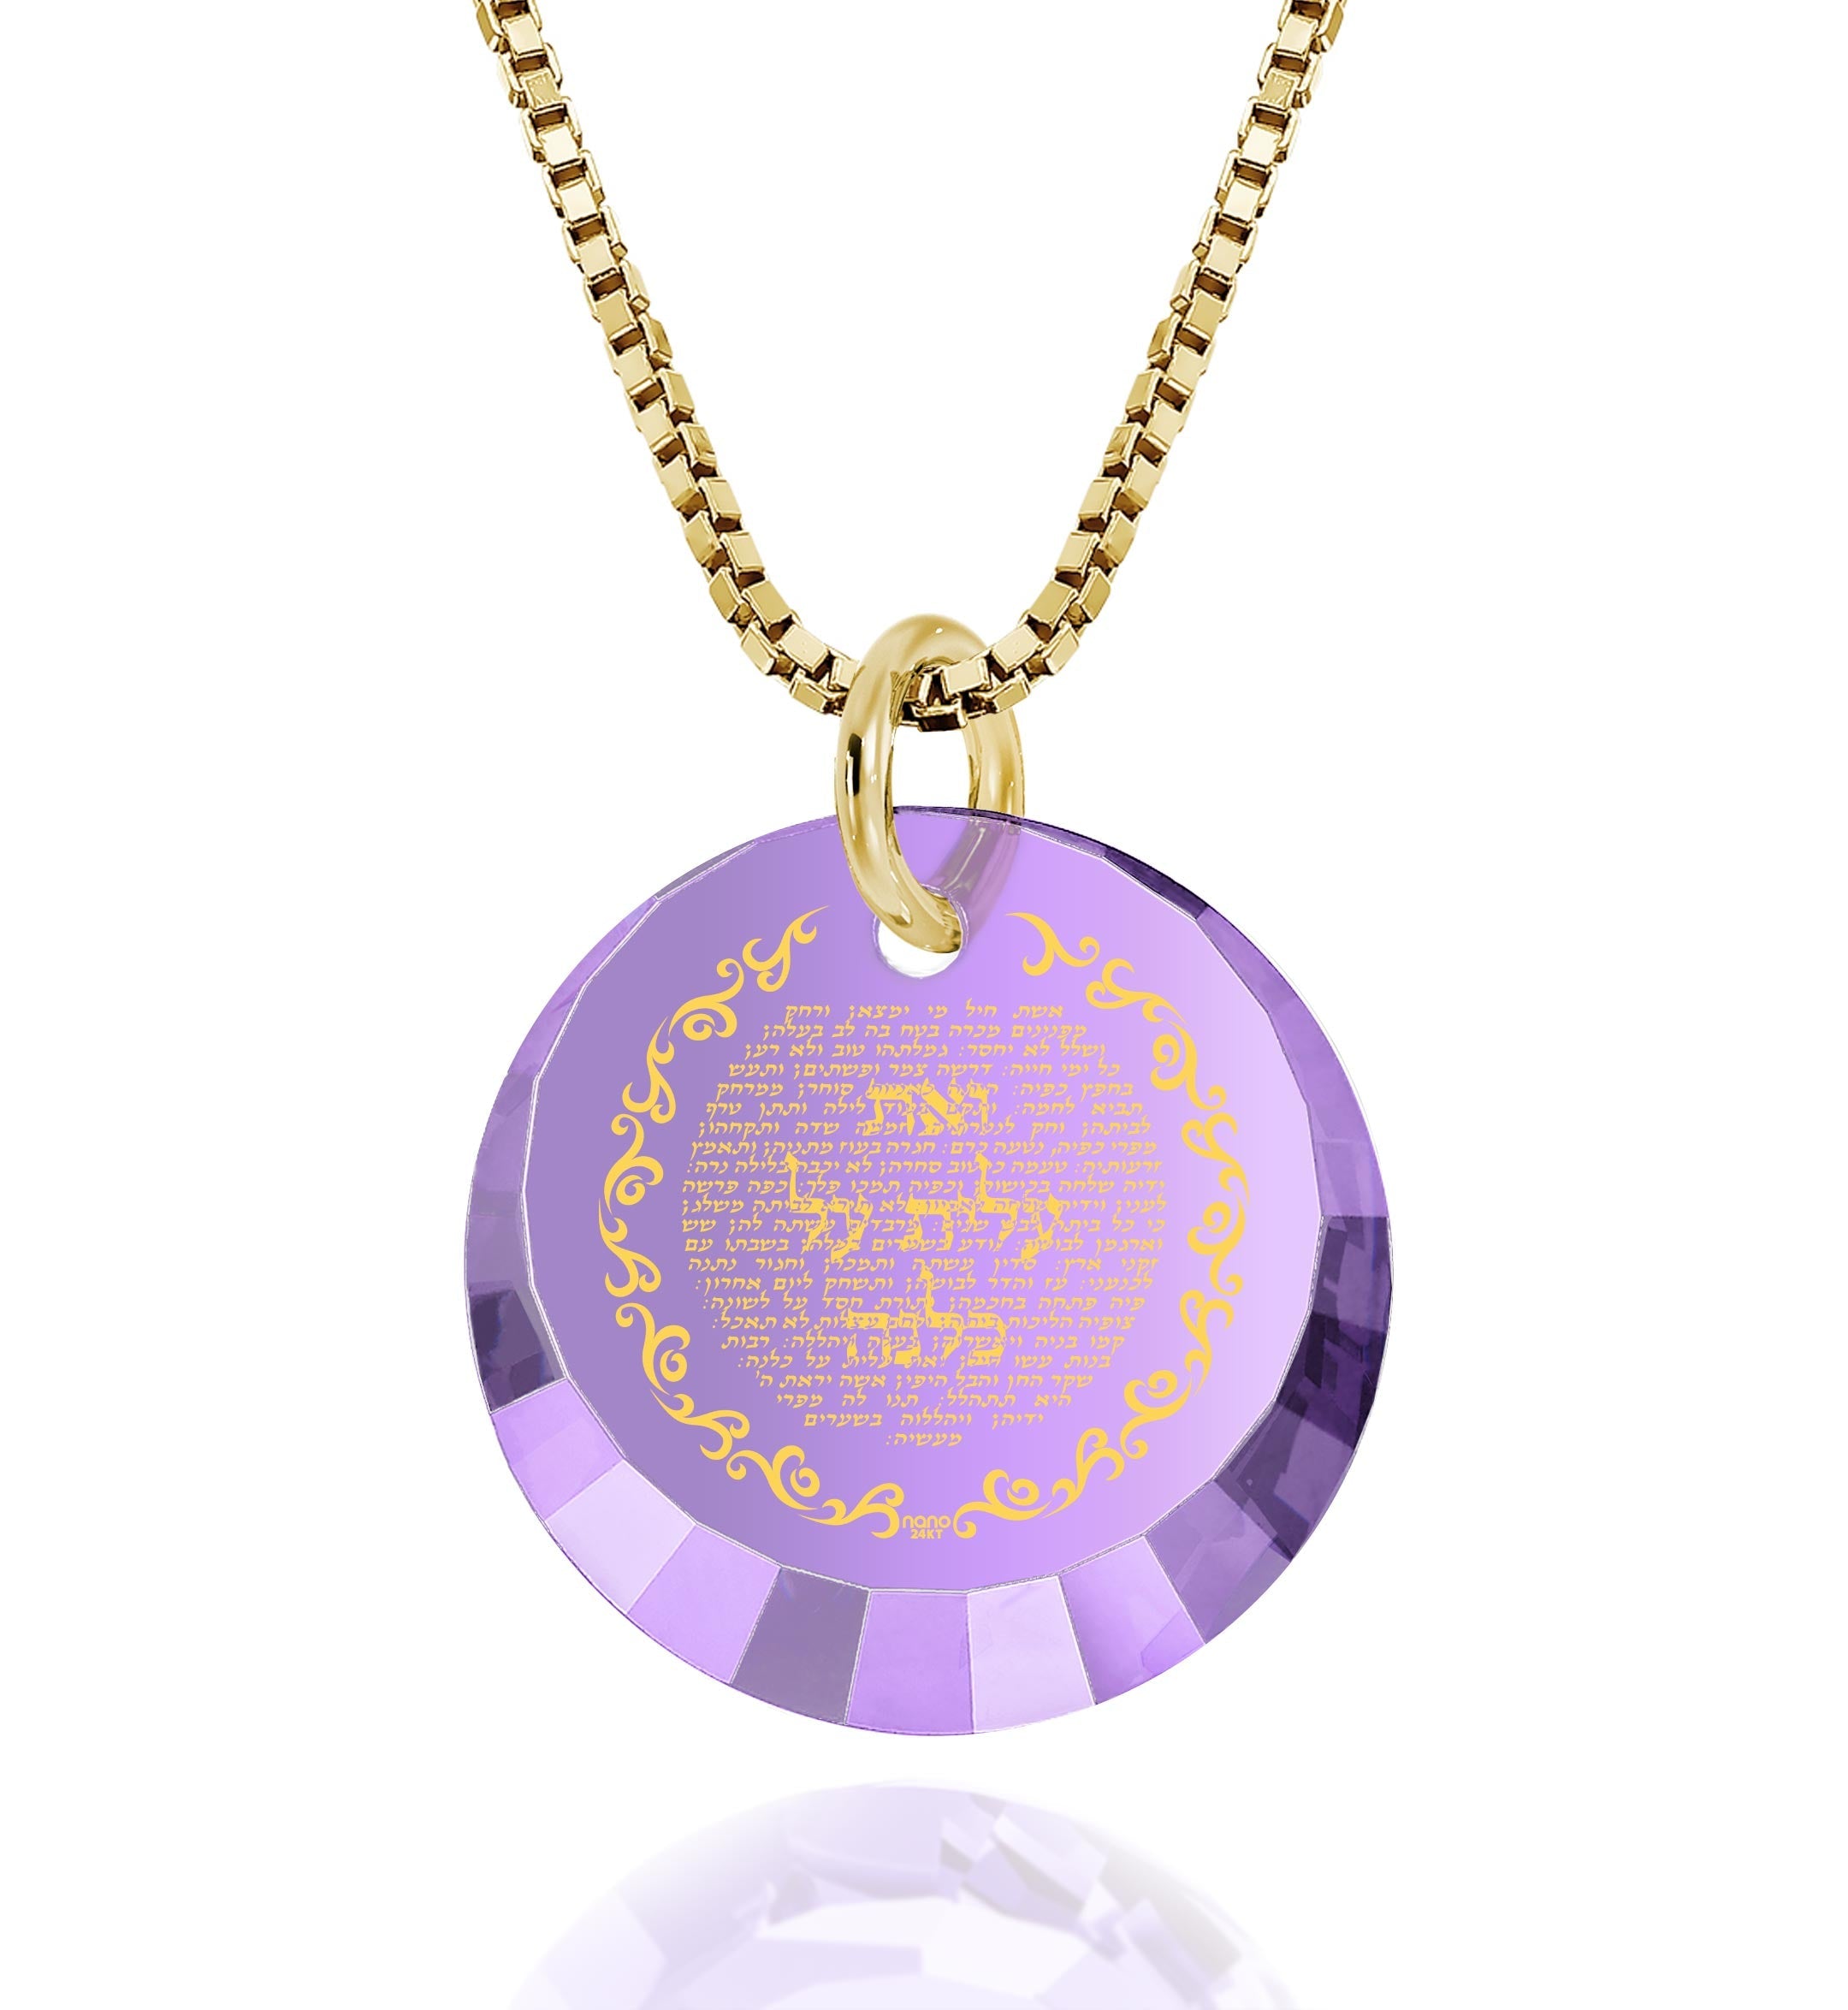 Eshet Chayil Hebrew Charm Necklace for Women 24k Gold Inscribed necklace with an Eshet Chayil pendant featuring Hebrew script, accompanied by a magnifying glass and a branded tag, isolated on a white background.